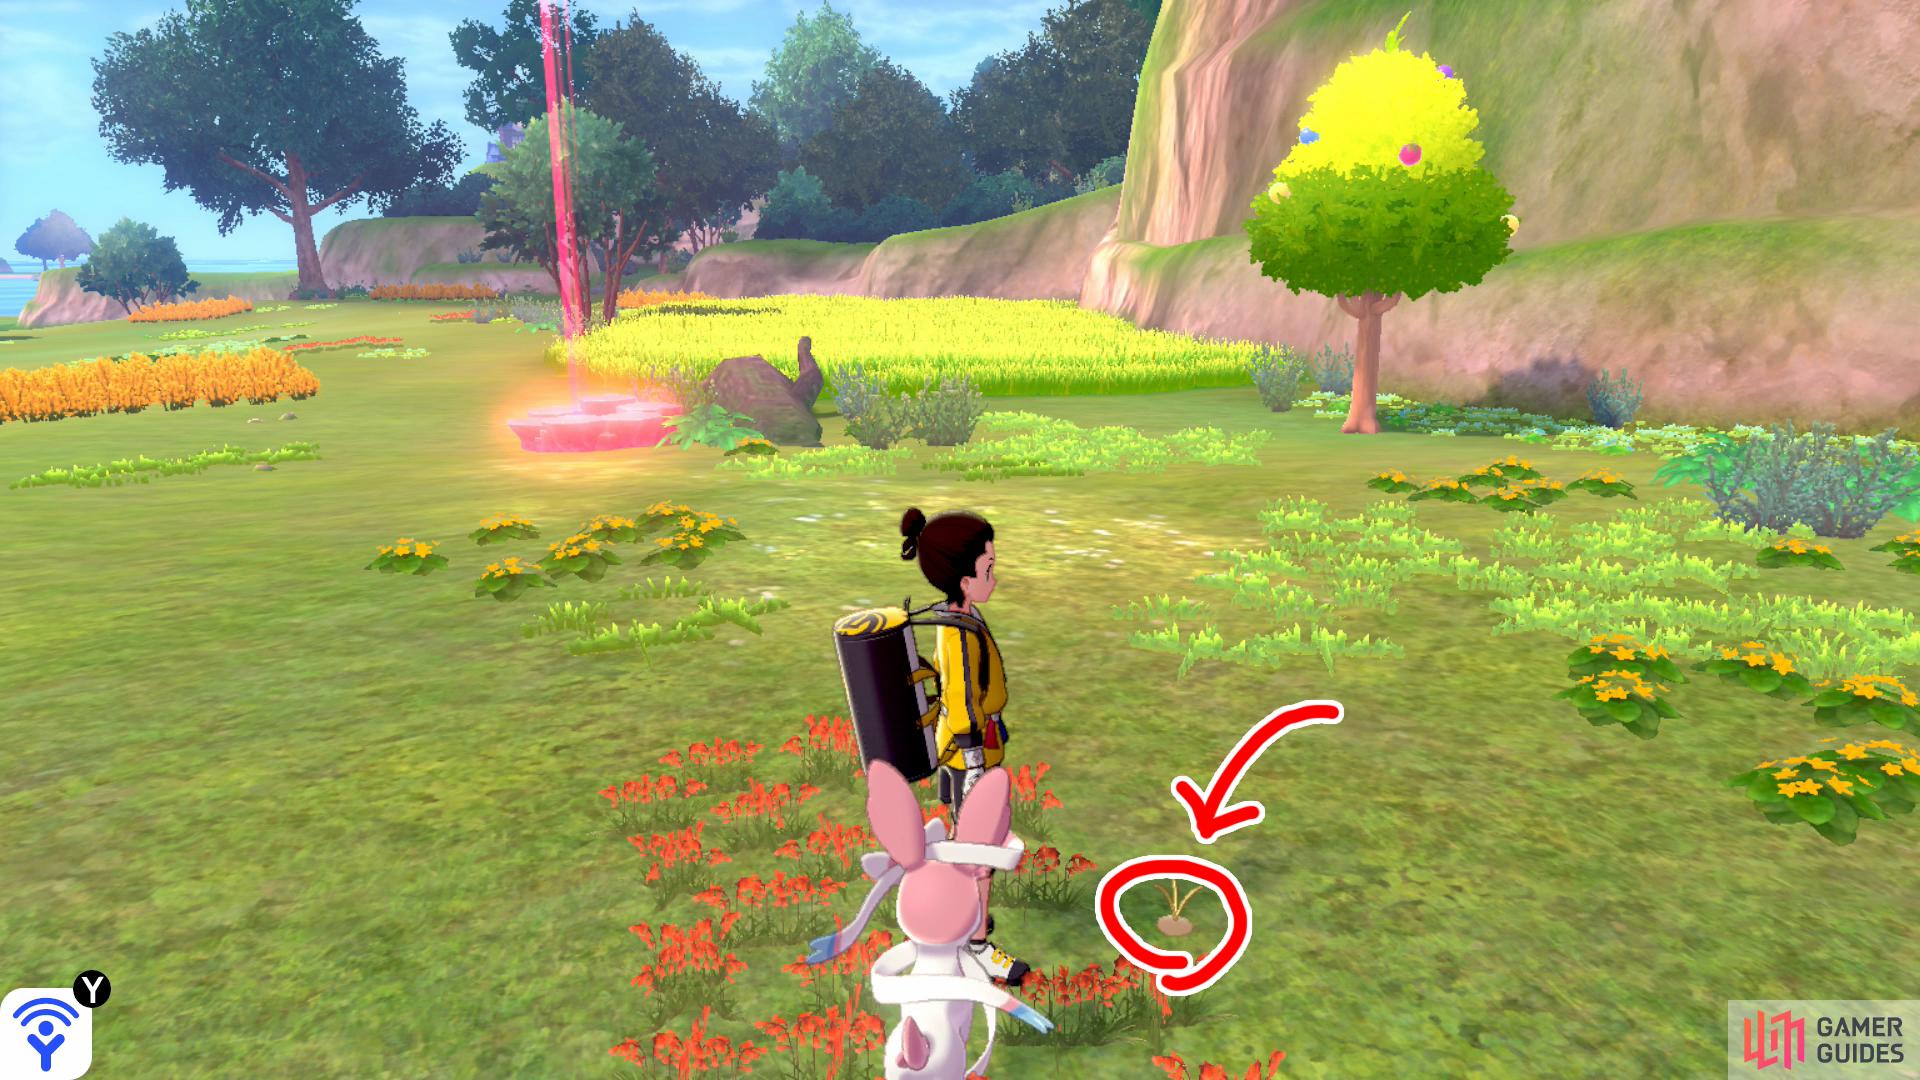 20/20: From Diglett 19, while you're still facing the nearby wall, towards the left, there's a red flowerbed that's parallel to a berry tree. Comb the edges of this flowerbed to find the last runaway mole.